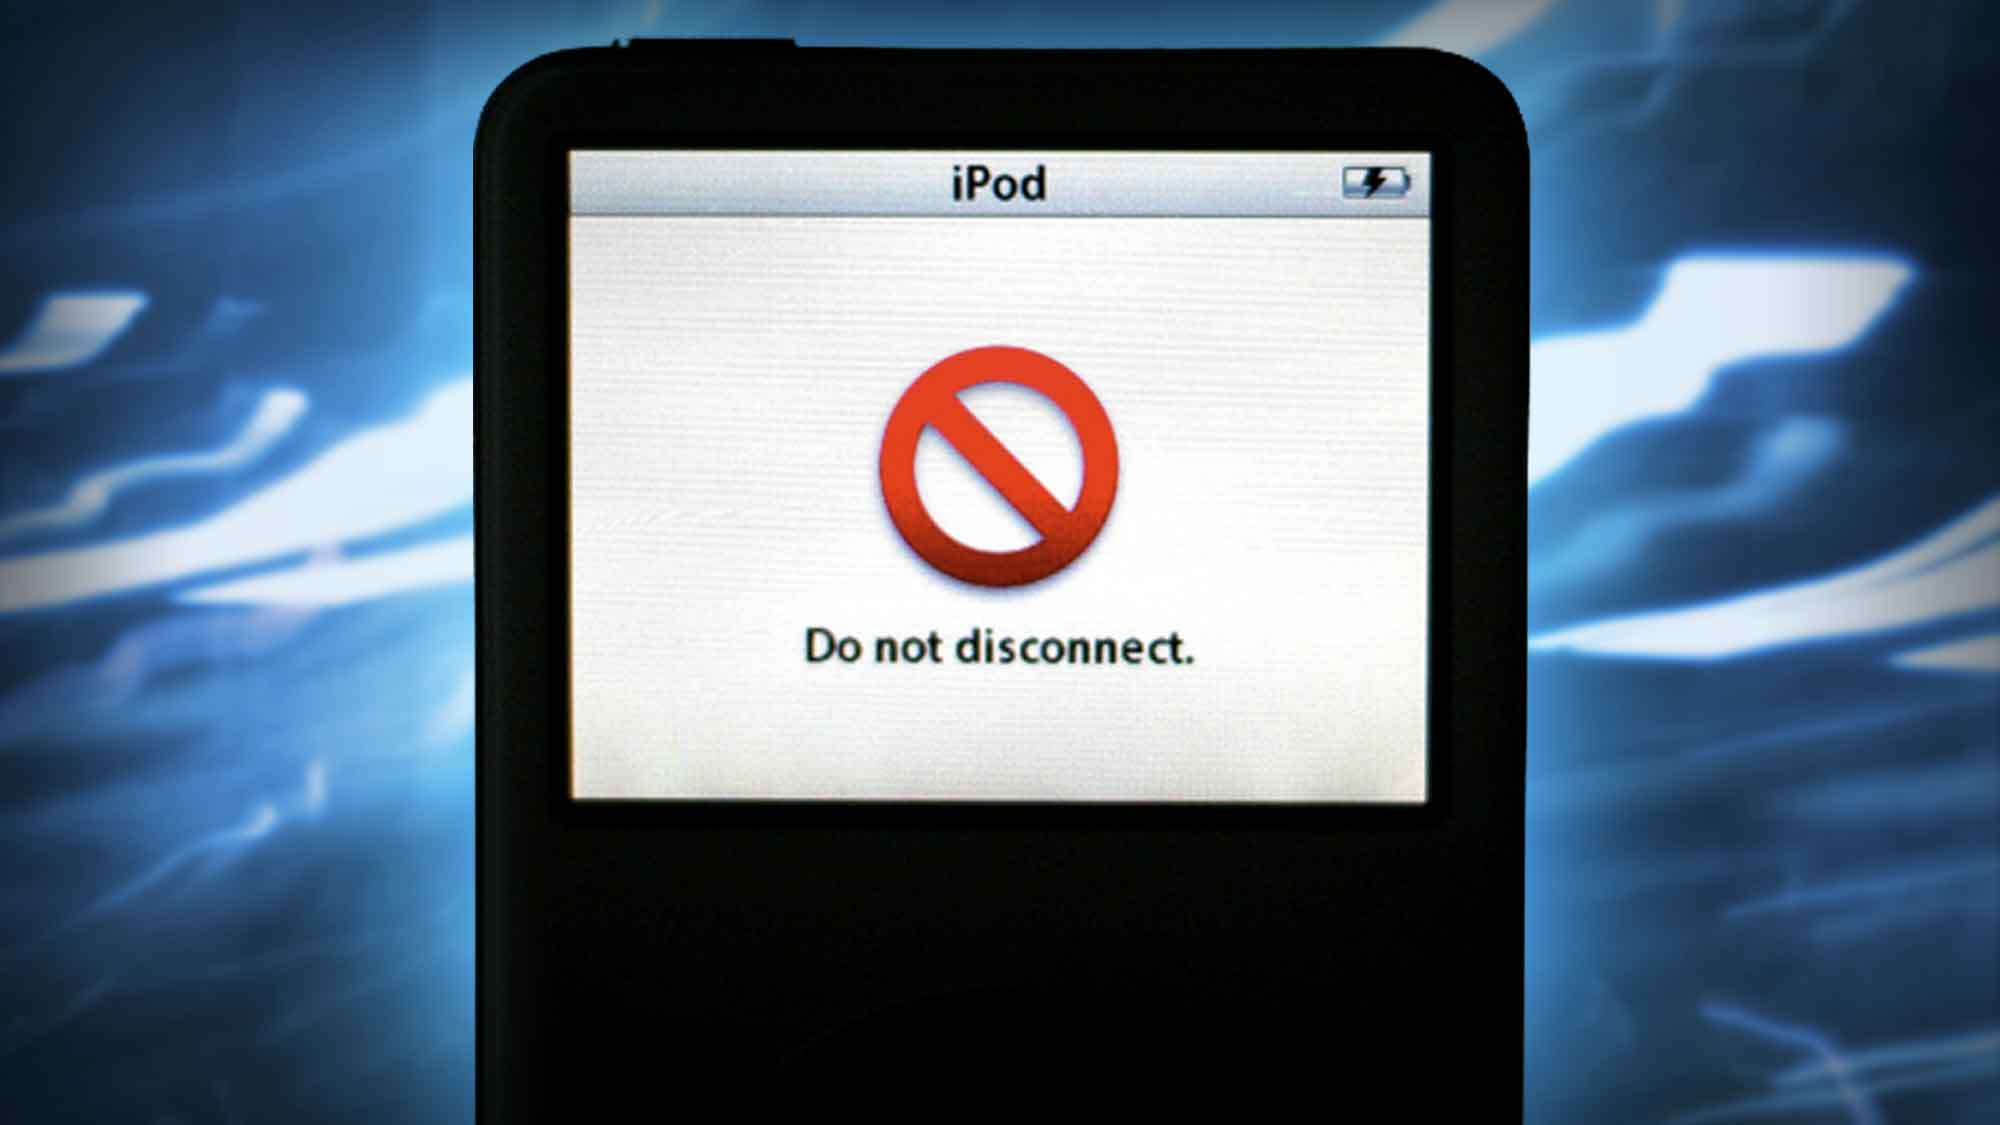 iPod DO NOT DISCONNECT Message Won't Go Away - FIXED!